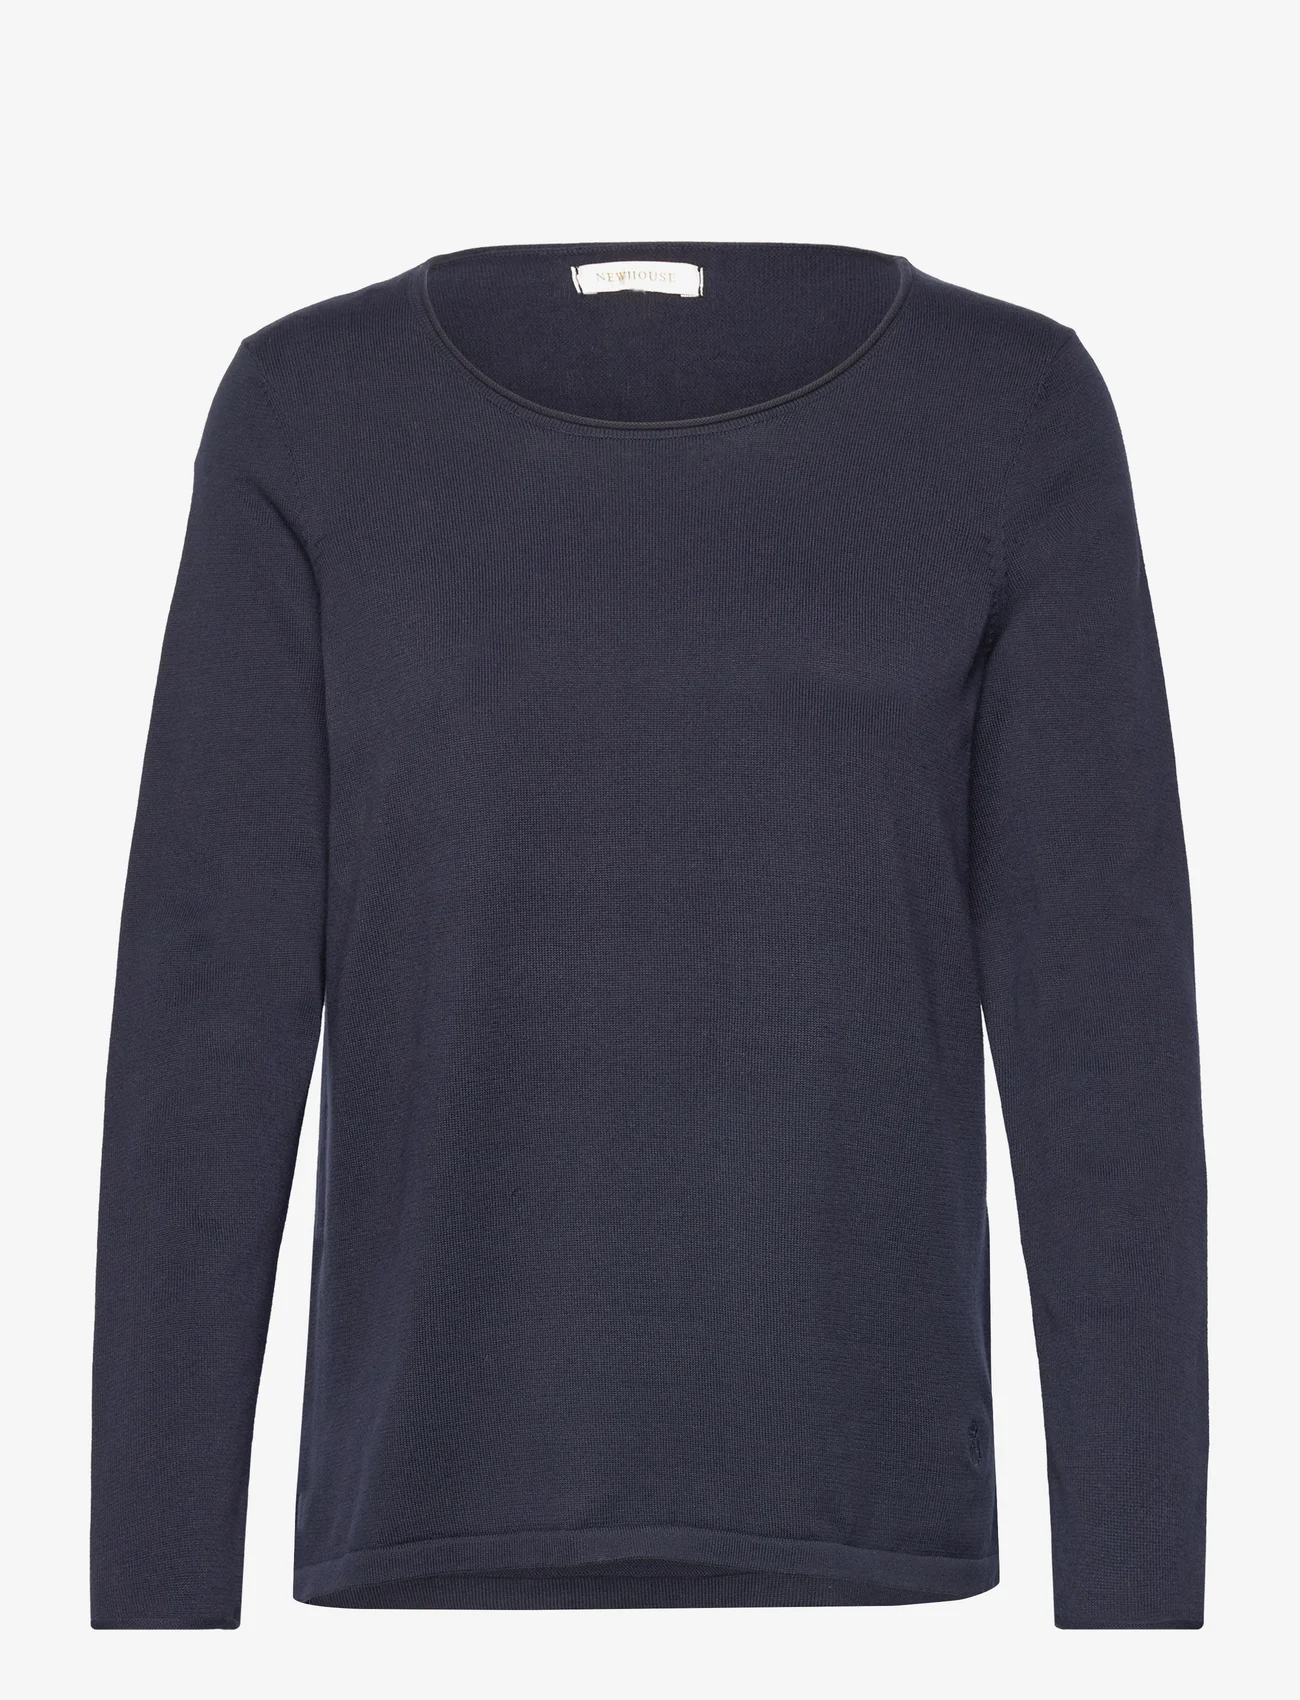 Newhouse - Ebba Sweater - jumpers - navy - 0